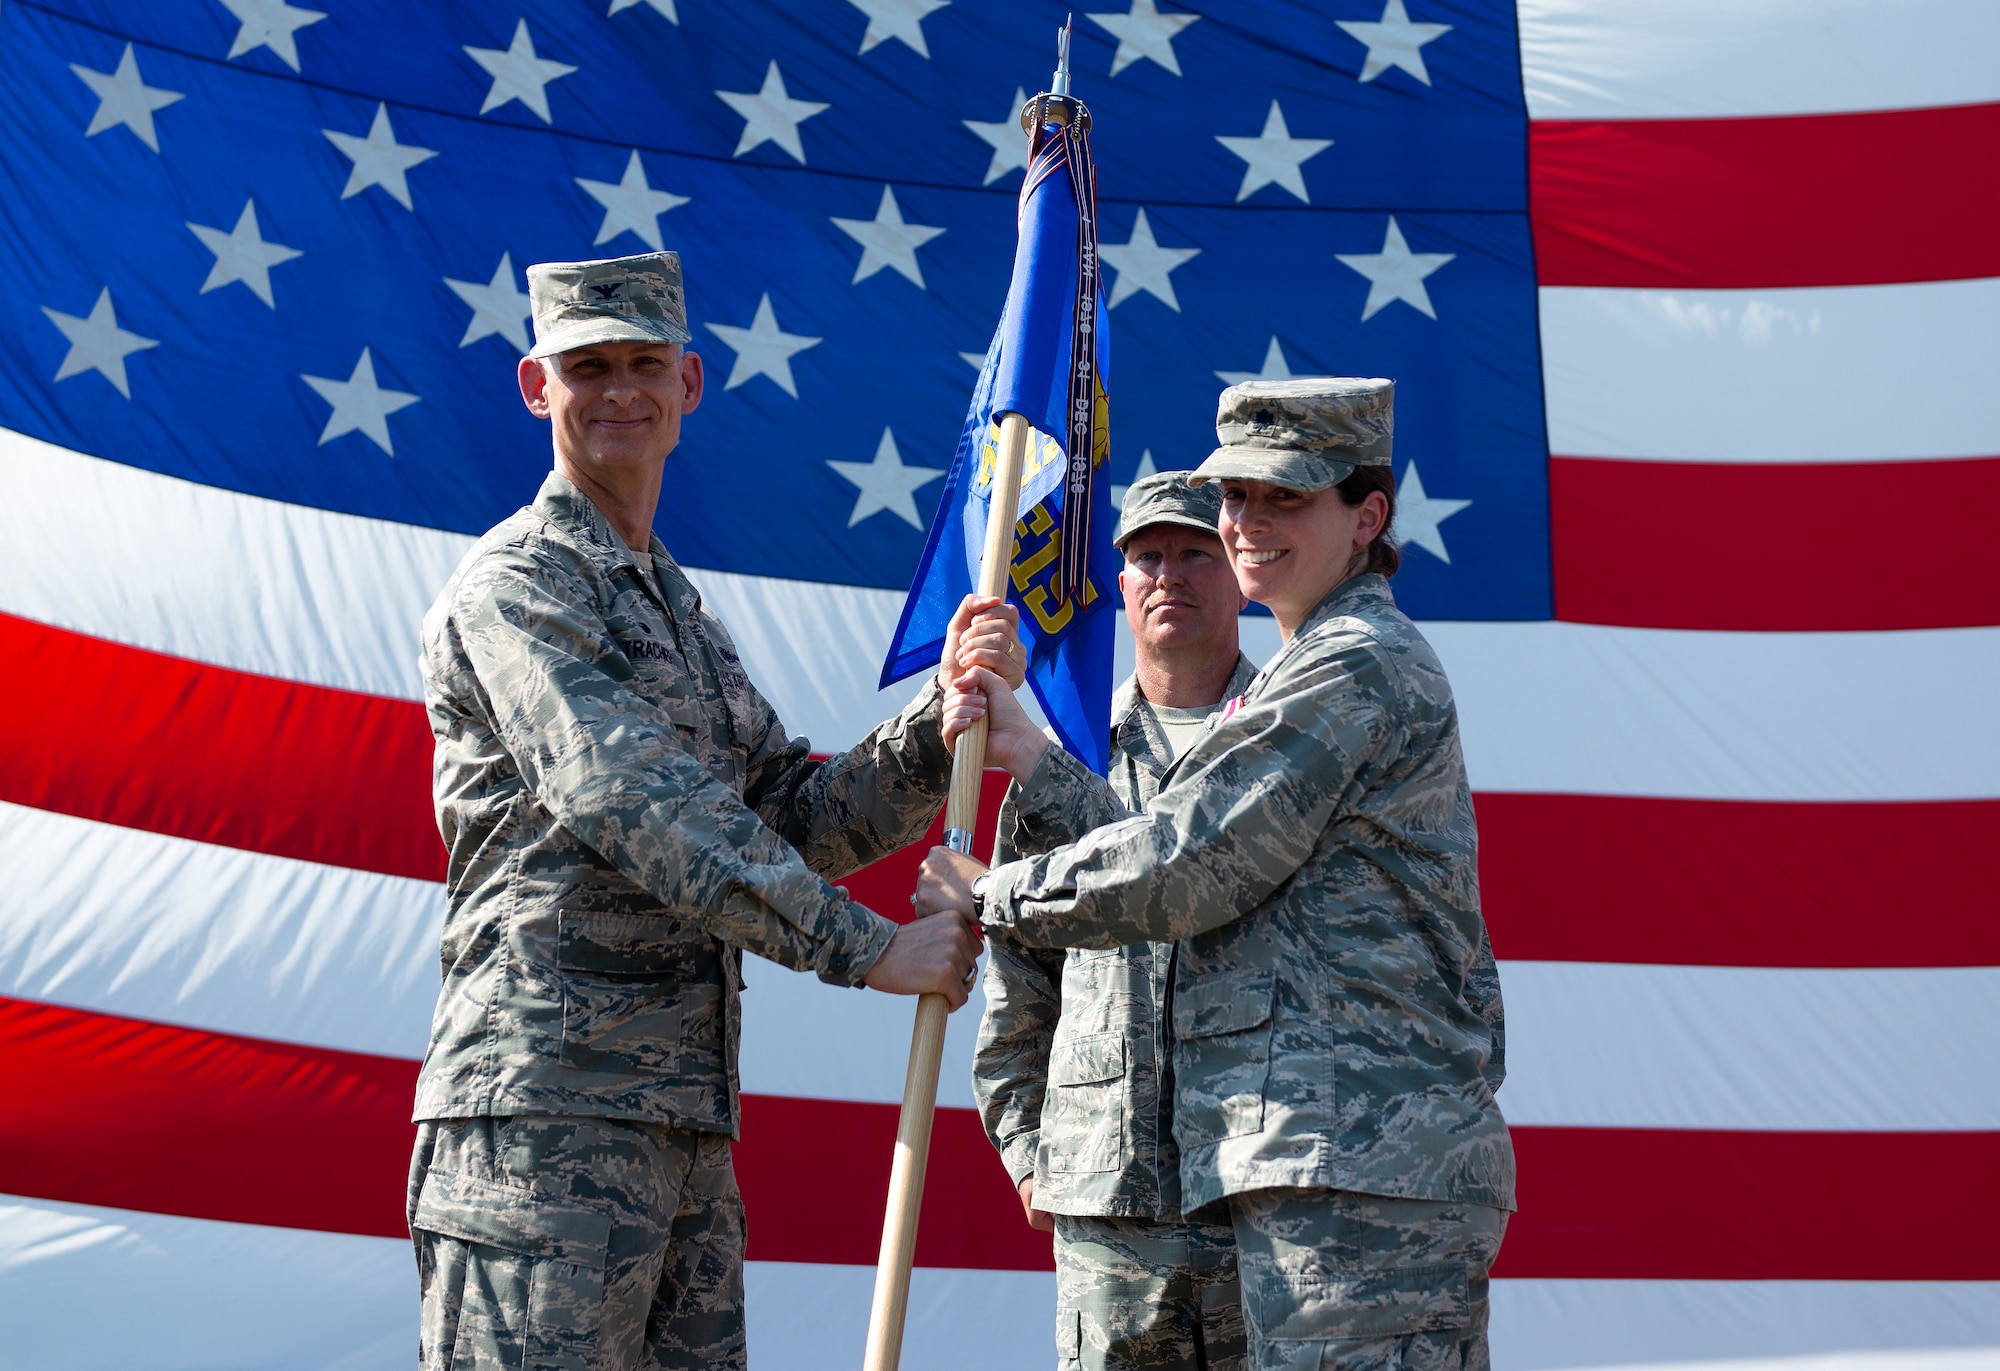 U.S. Air Force Col. James Trachier, 38th Cyberspace Engineering Installation Group commander, passes the guidon to Lt. Col. Jennifer Carns, 85th Engineering Installation Squadron outgoing commander, during a change of command ceremony outside Maltby Hall on Keesler Air Force Base, Mississippi, June 4, 2019. The ceremony is a symbol of command being exchanged from one commander to the next. (U.S. Air Force photo by Airman 1st Class Kimberly L. Mueller)